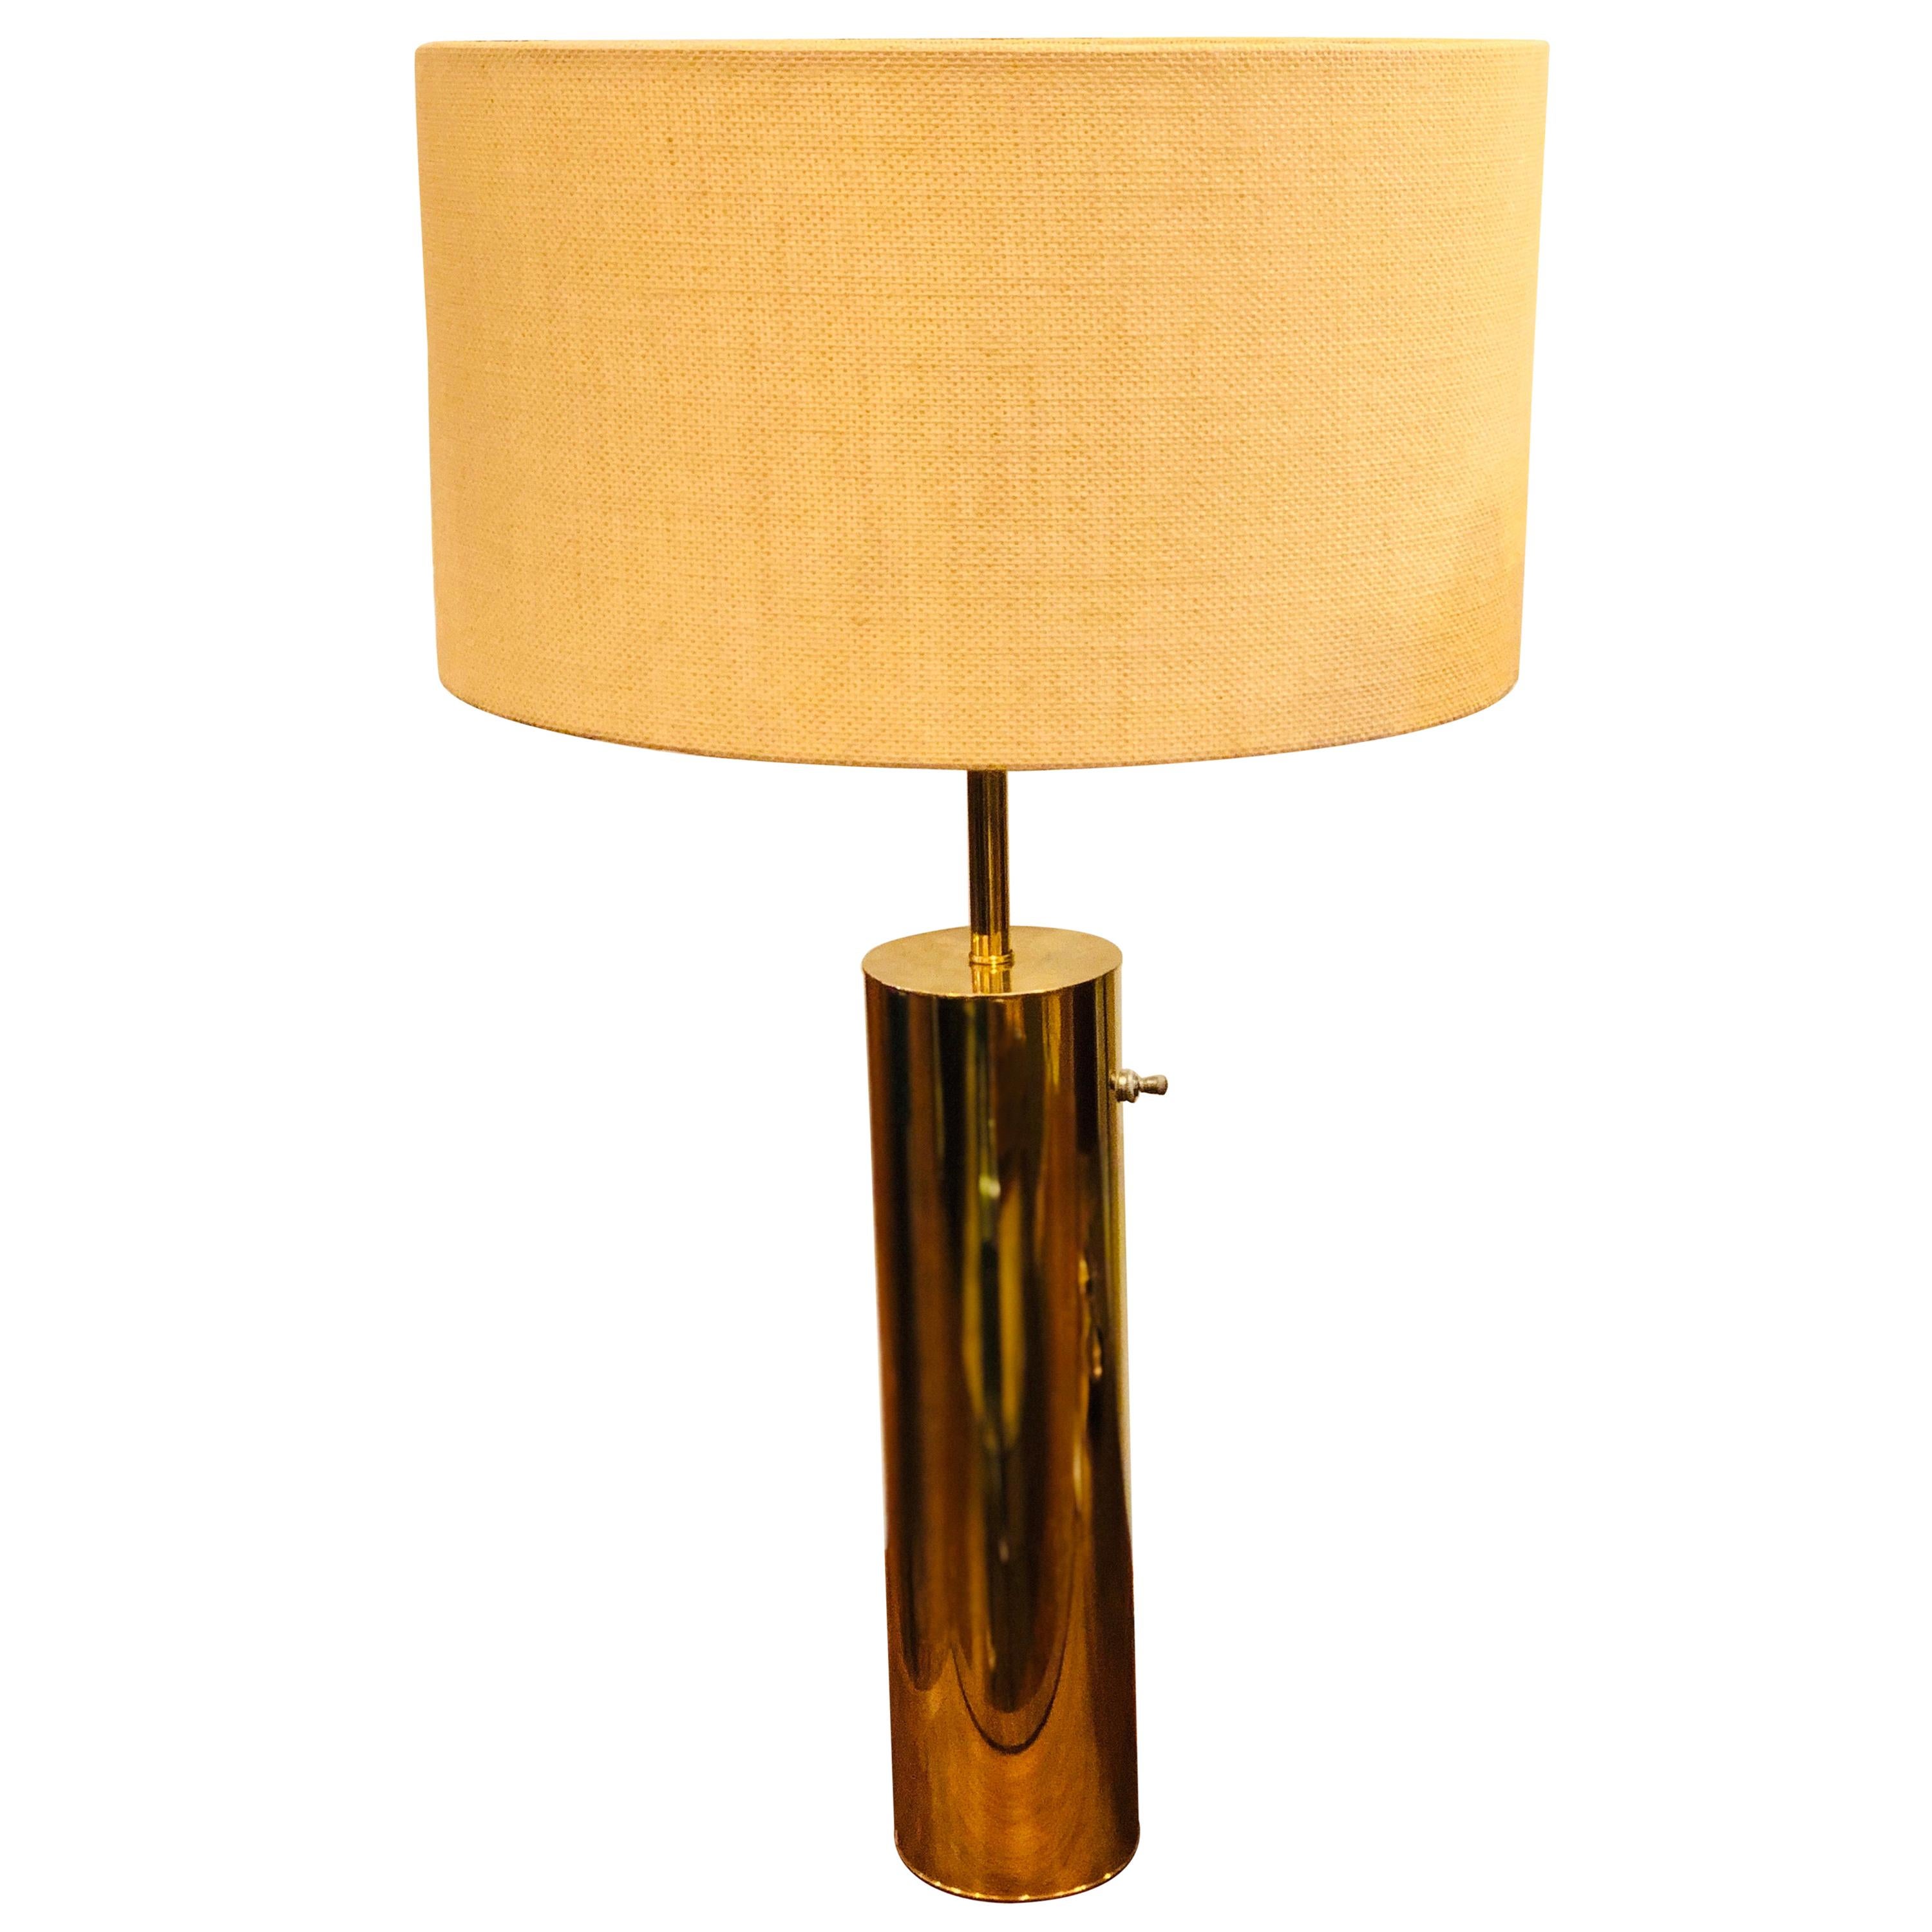 1950s Rare Polished Brushed Brass Lamp by Nessen Studios